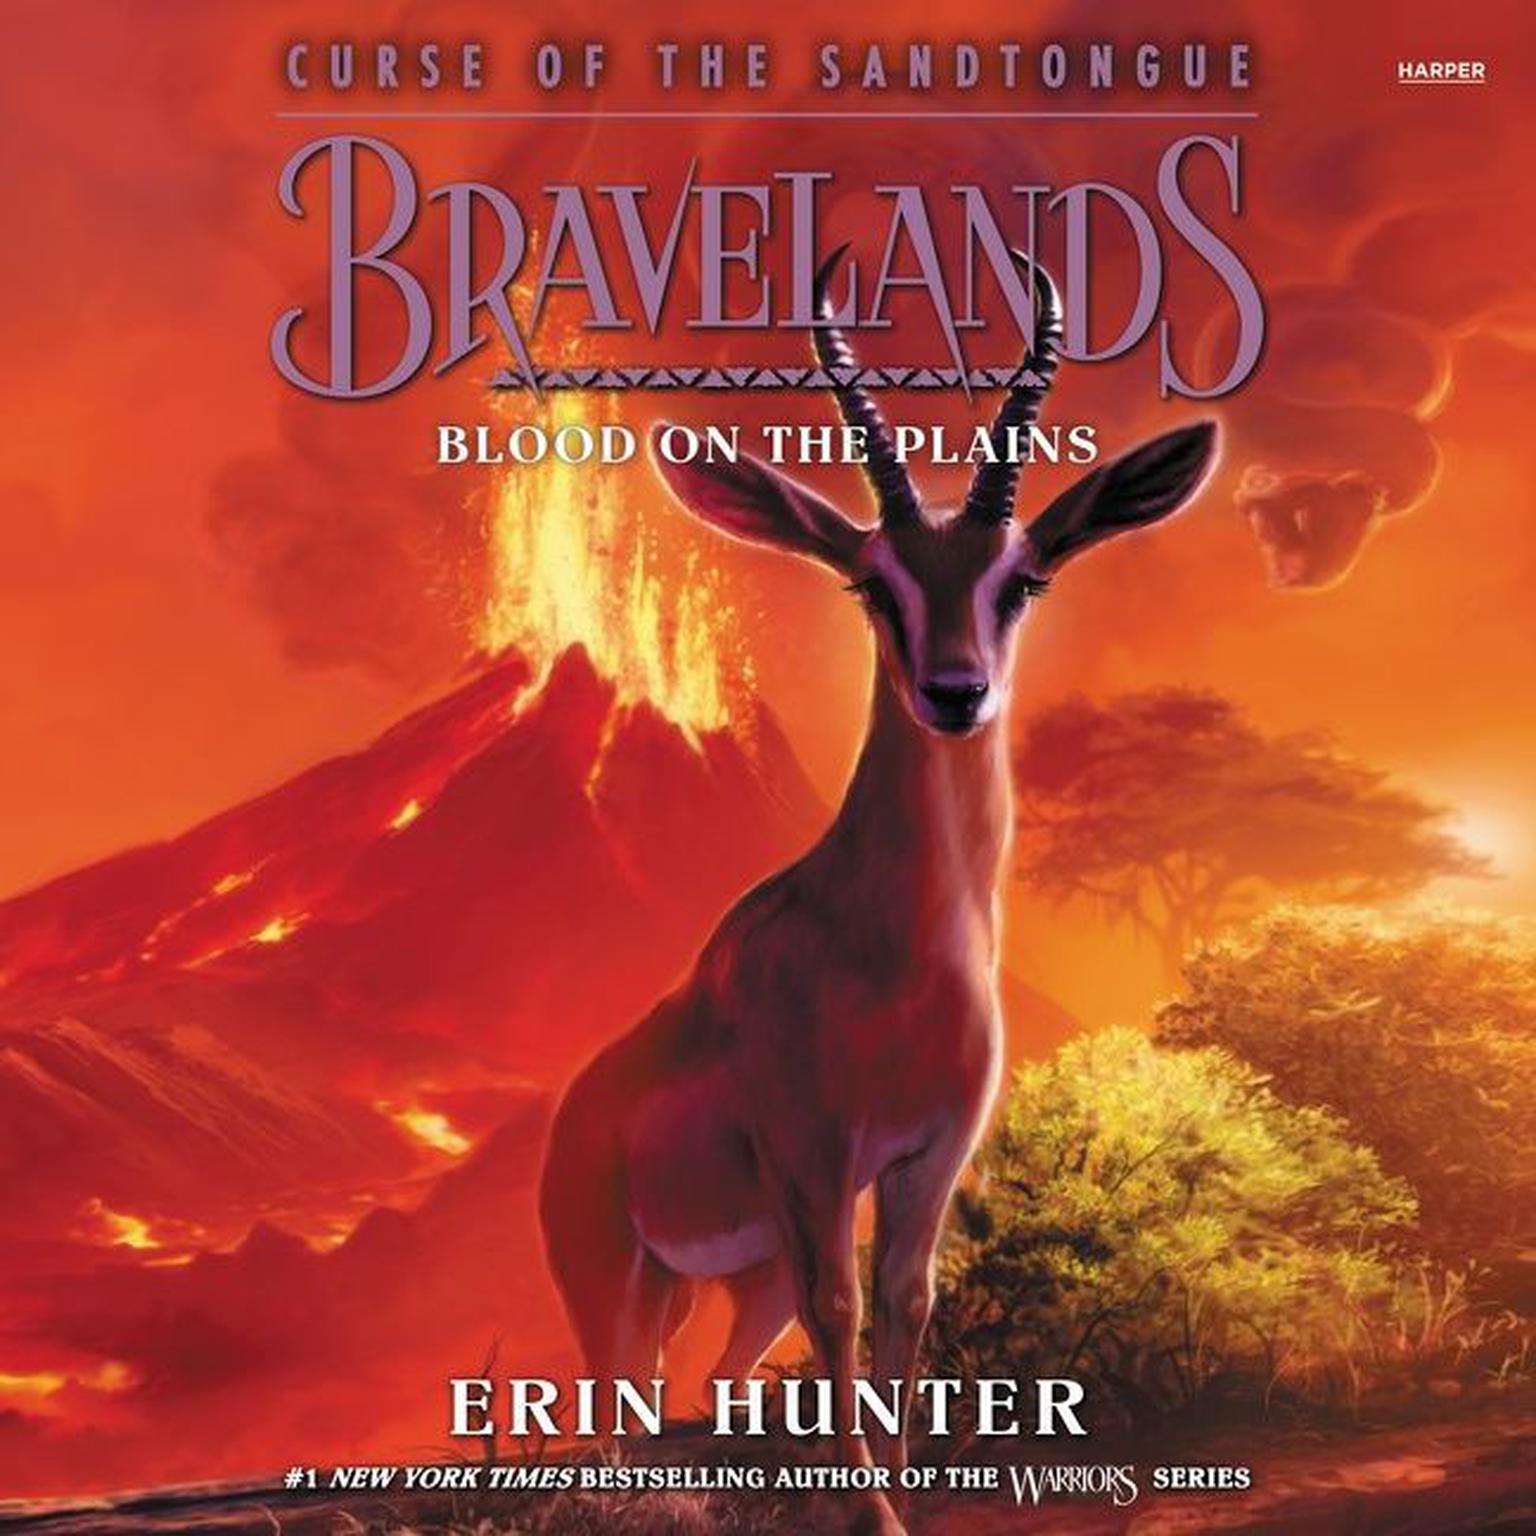 Bravelands: Curse of the Sandtongue #3: Blood on the Plains Audiobook, by Erin Hunter